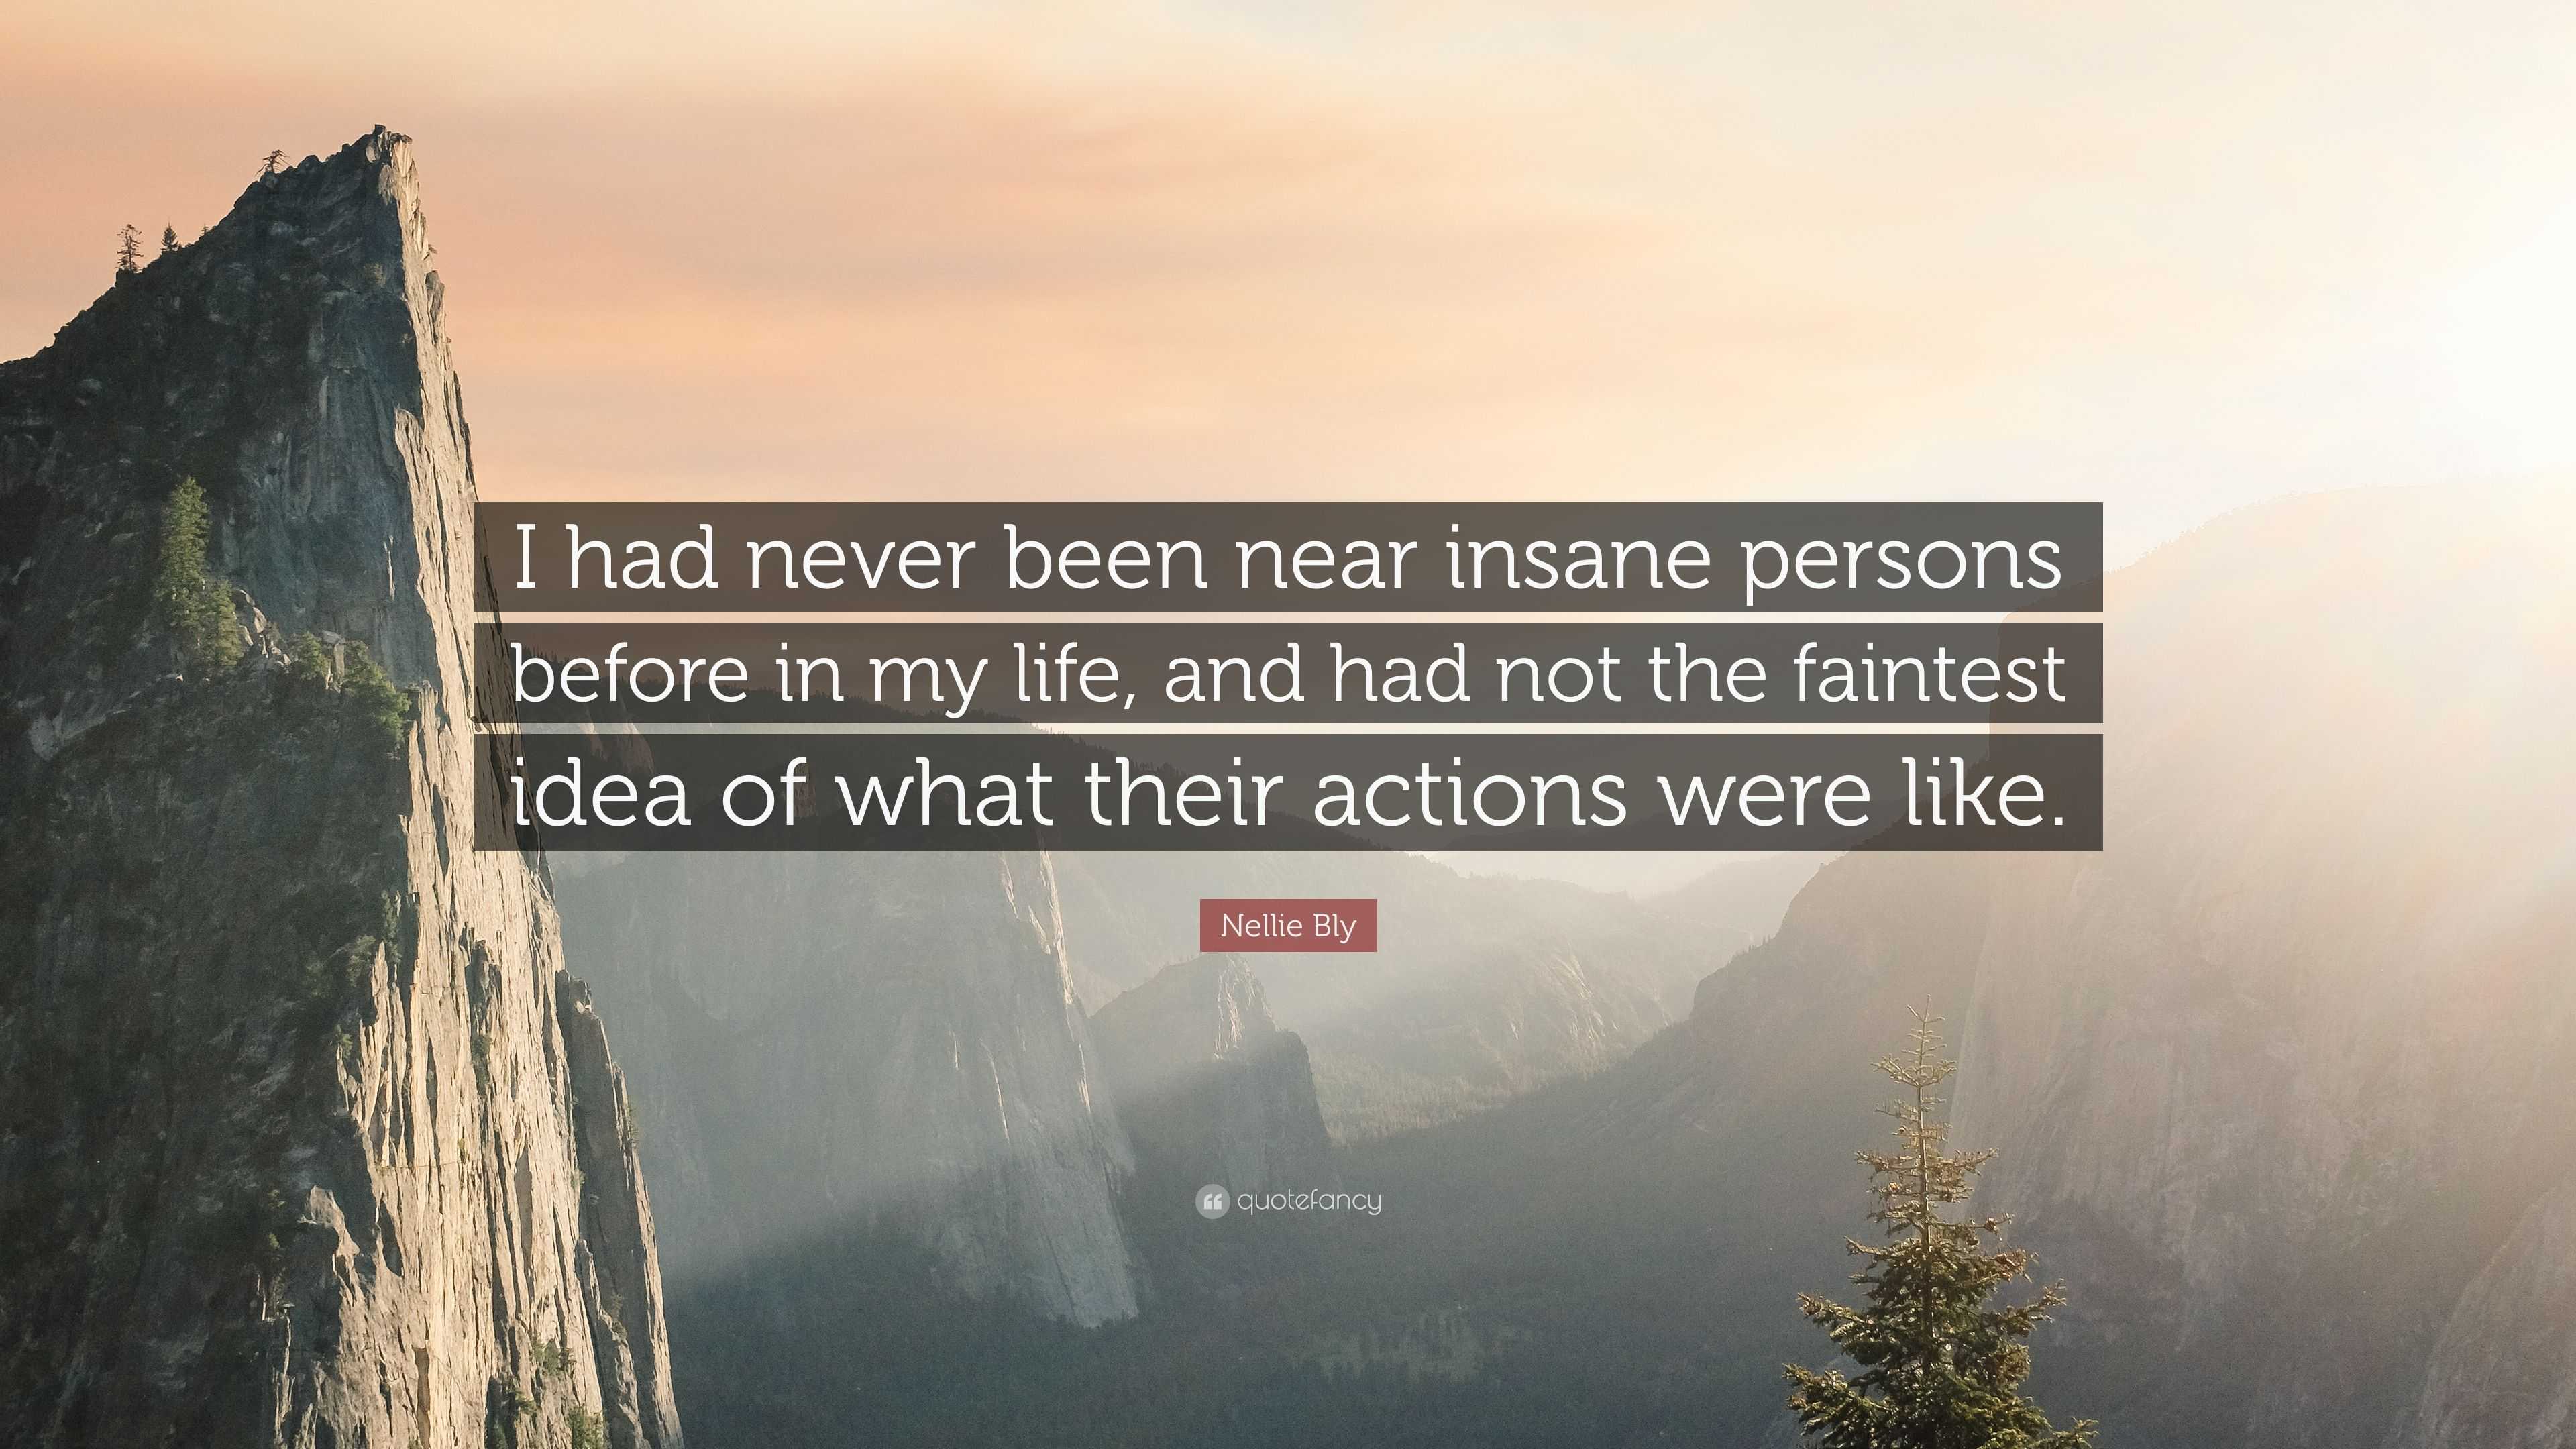 Nellie Bly Quote: "I had never been near insane persons ...